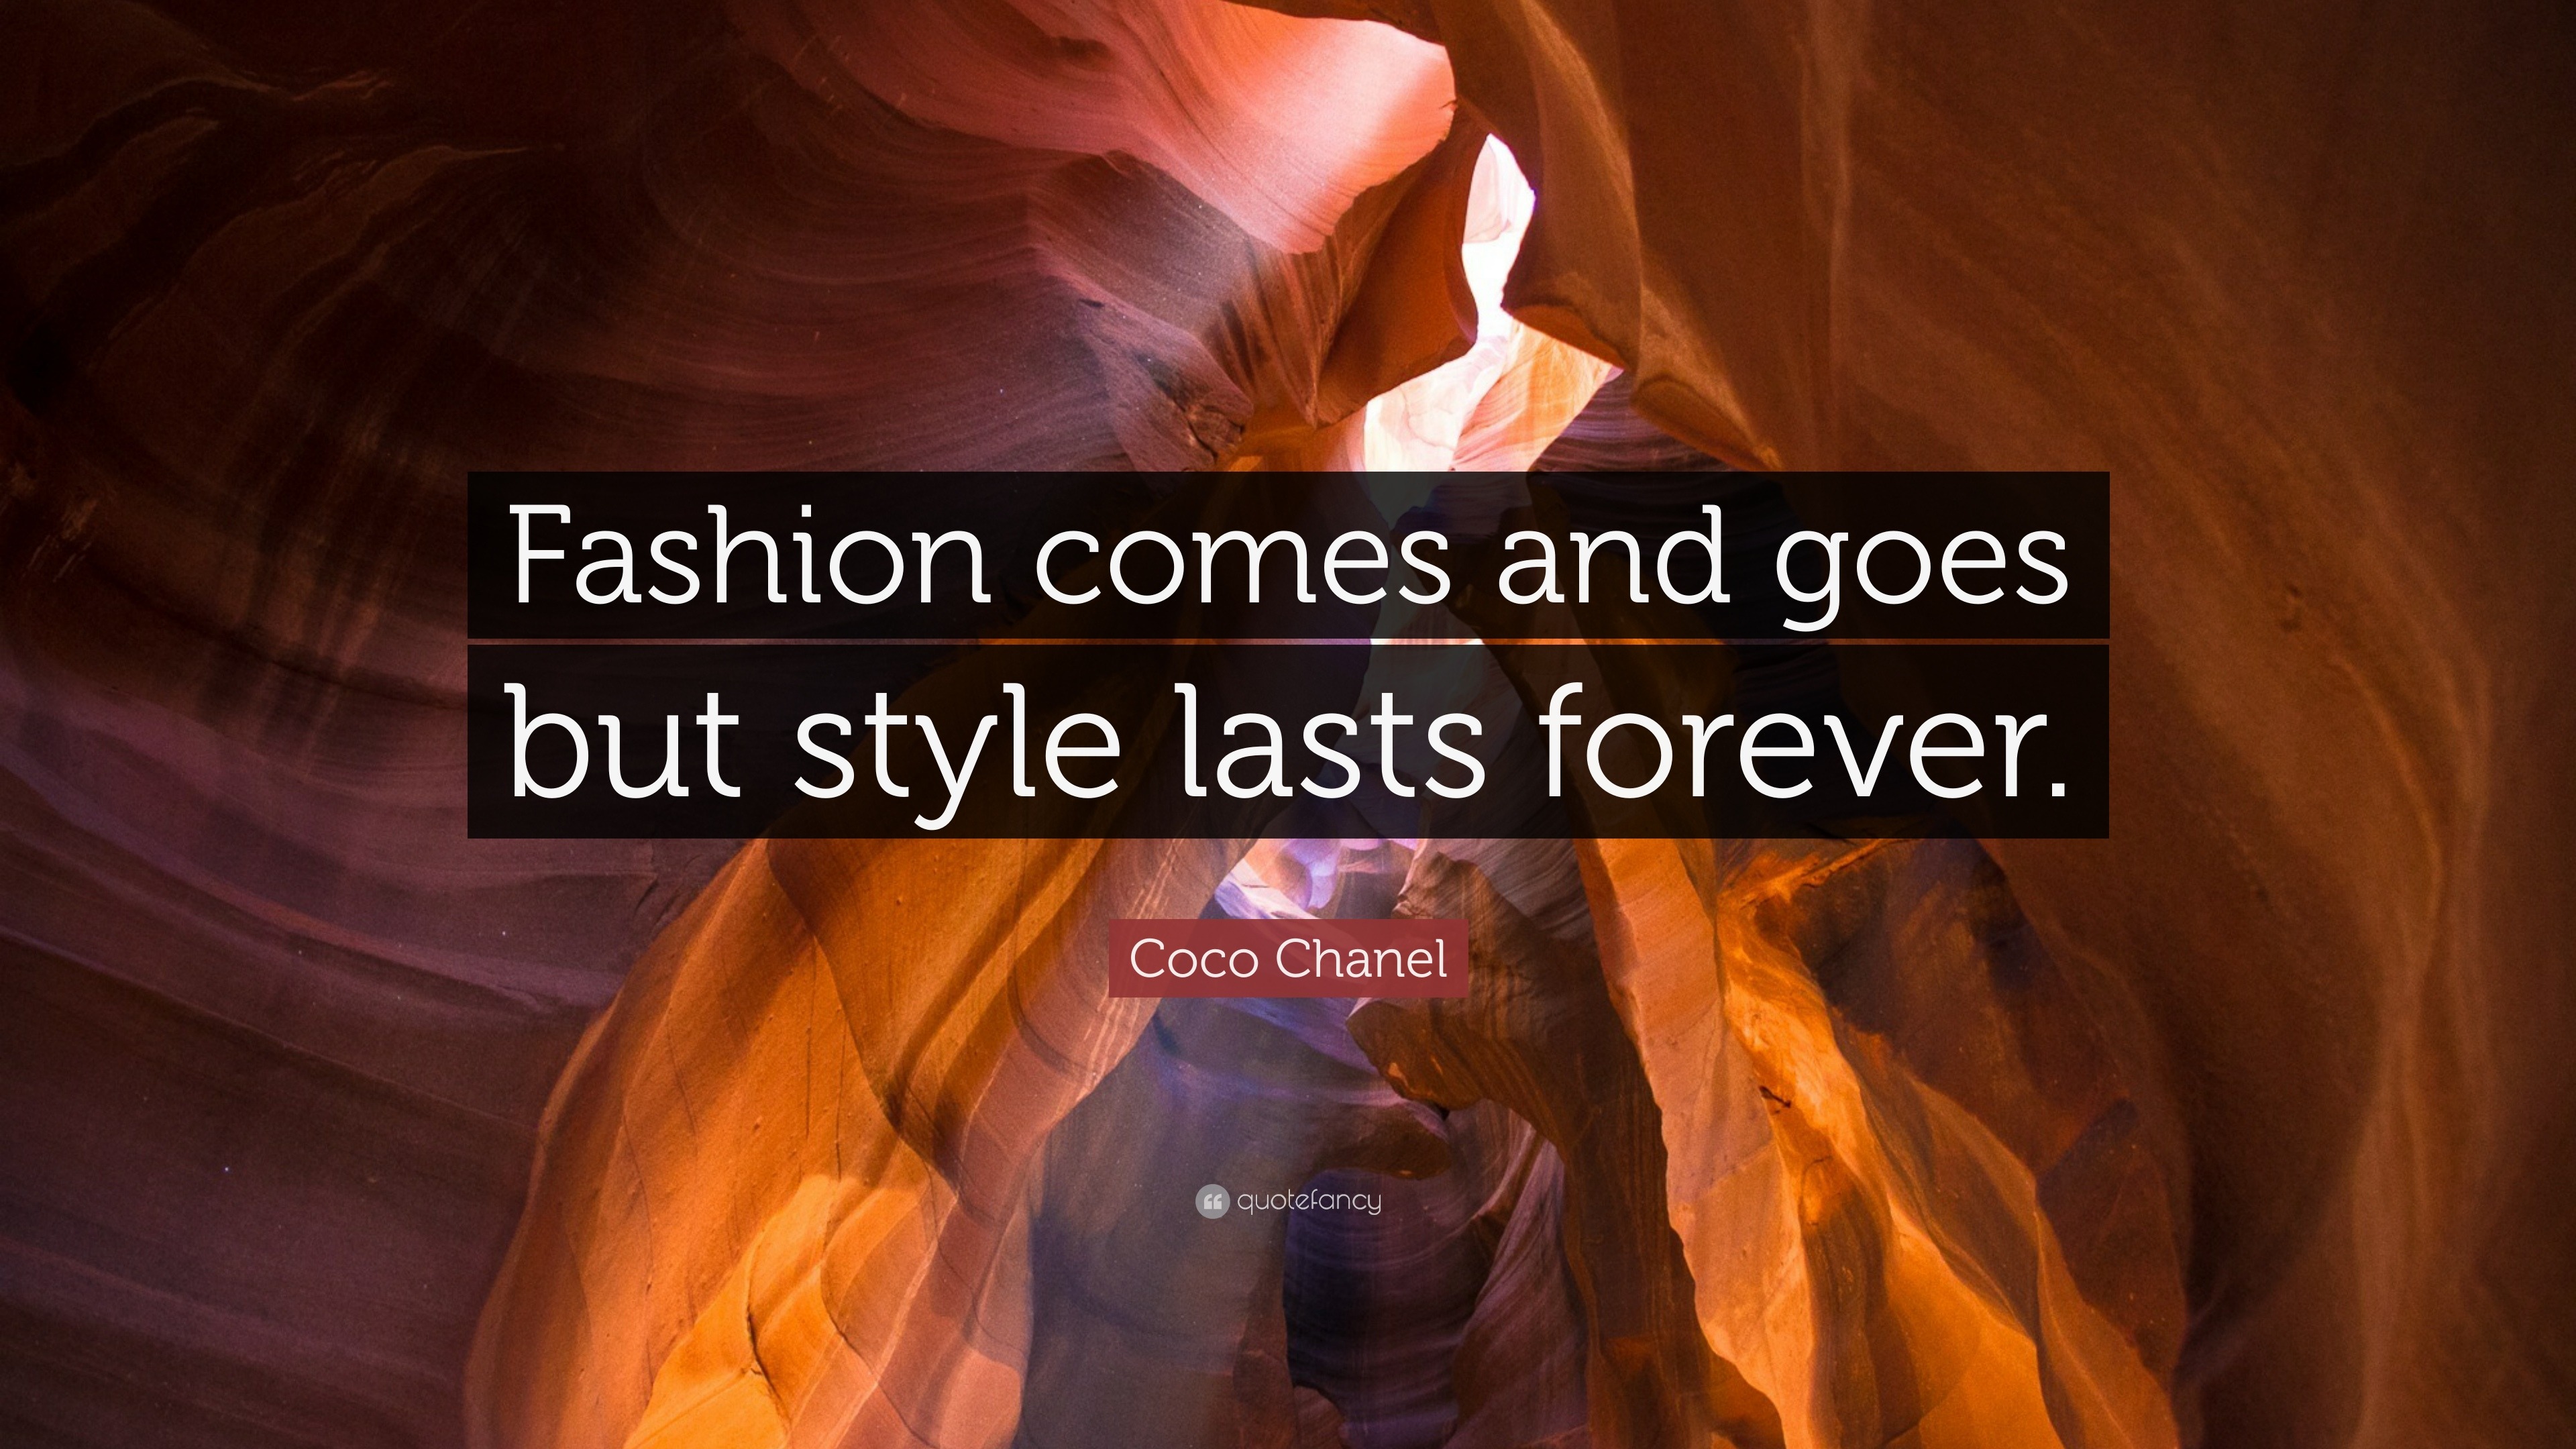 Coco Chanel Quote: “Fashion comes and goes but style lasts forever.”